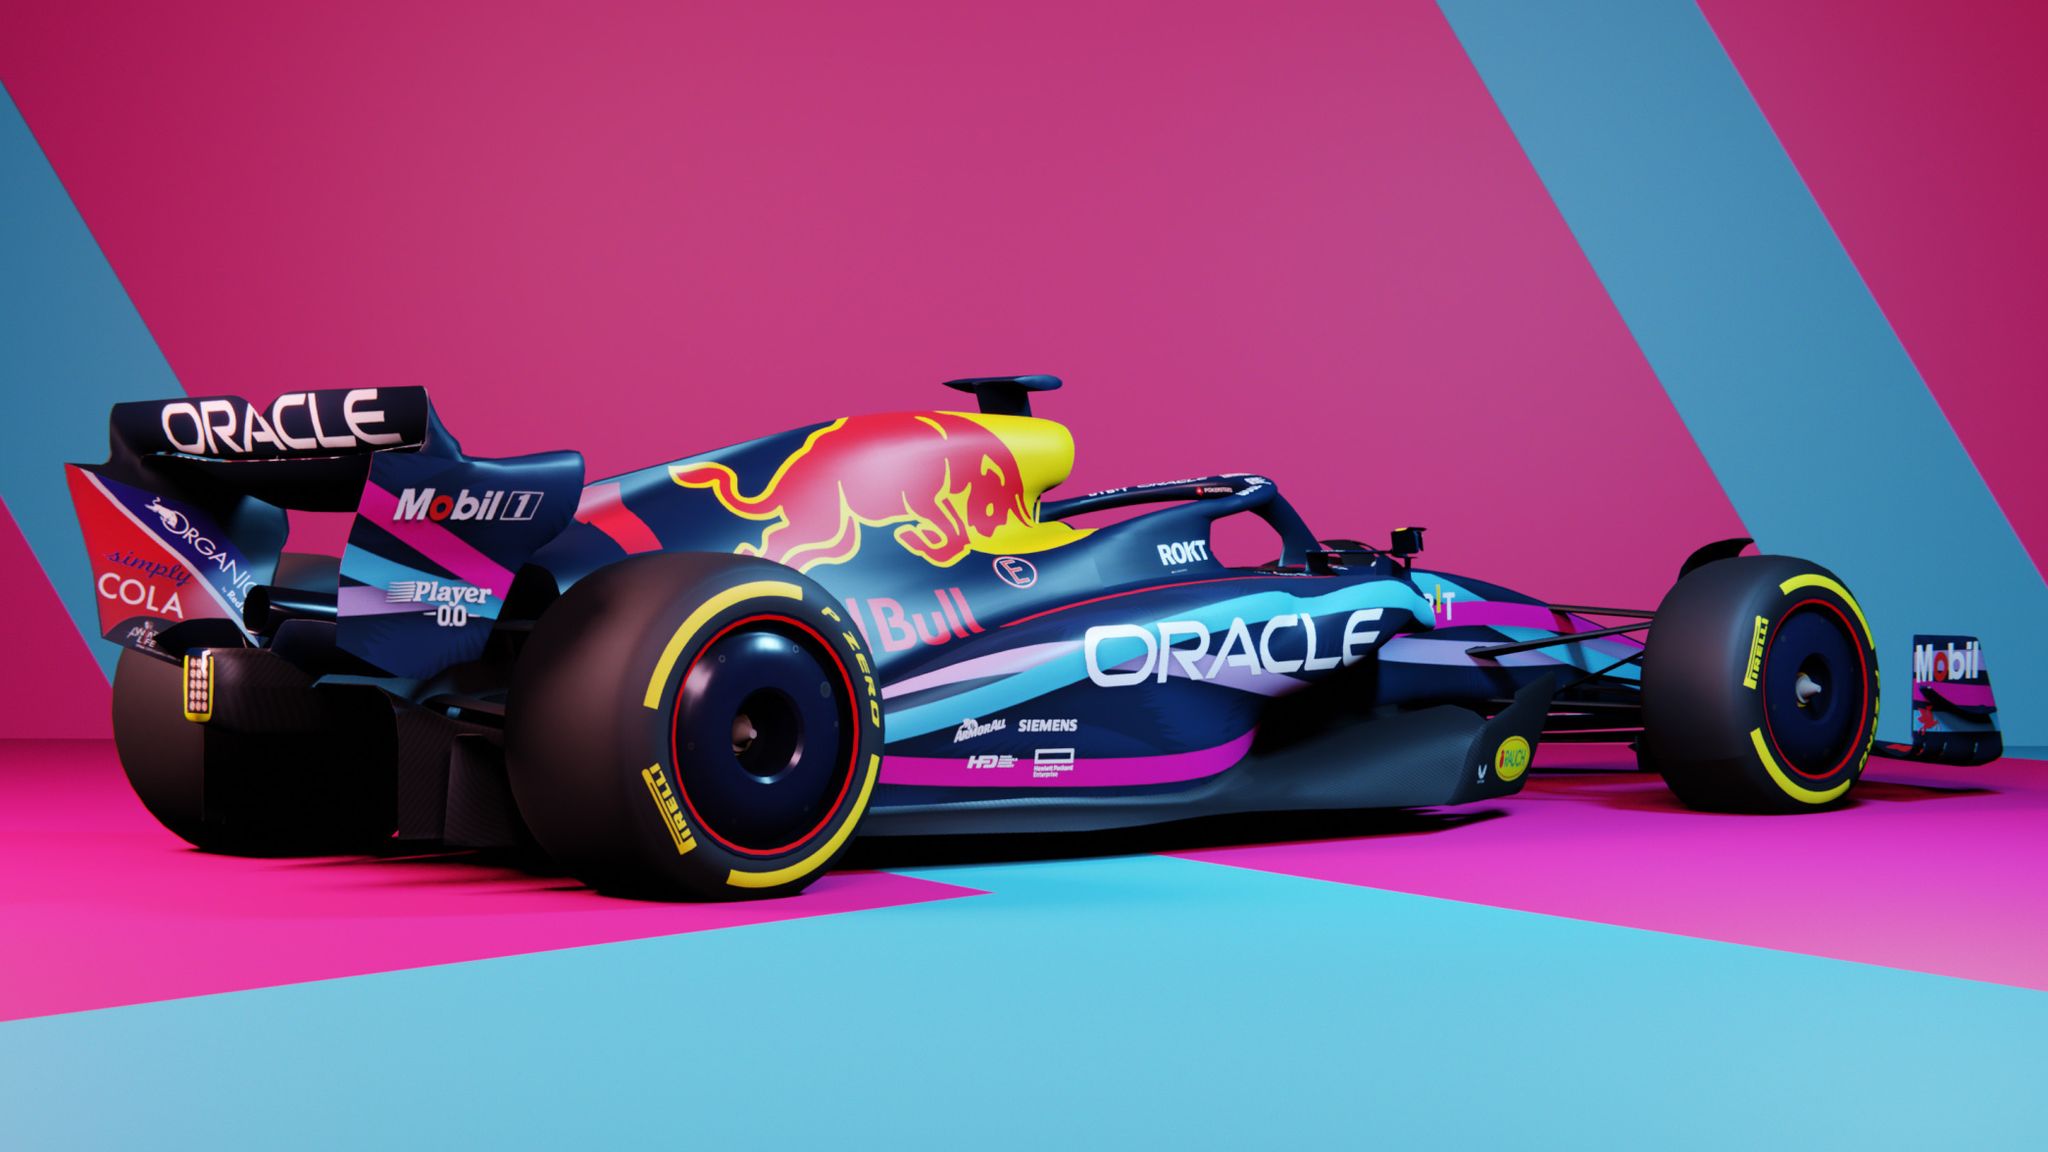 Miami Grand Prix: Red Bull unveil special RB19 livery designed by fan for US race